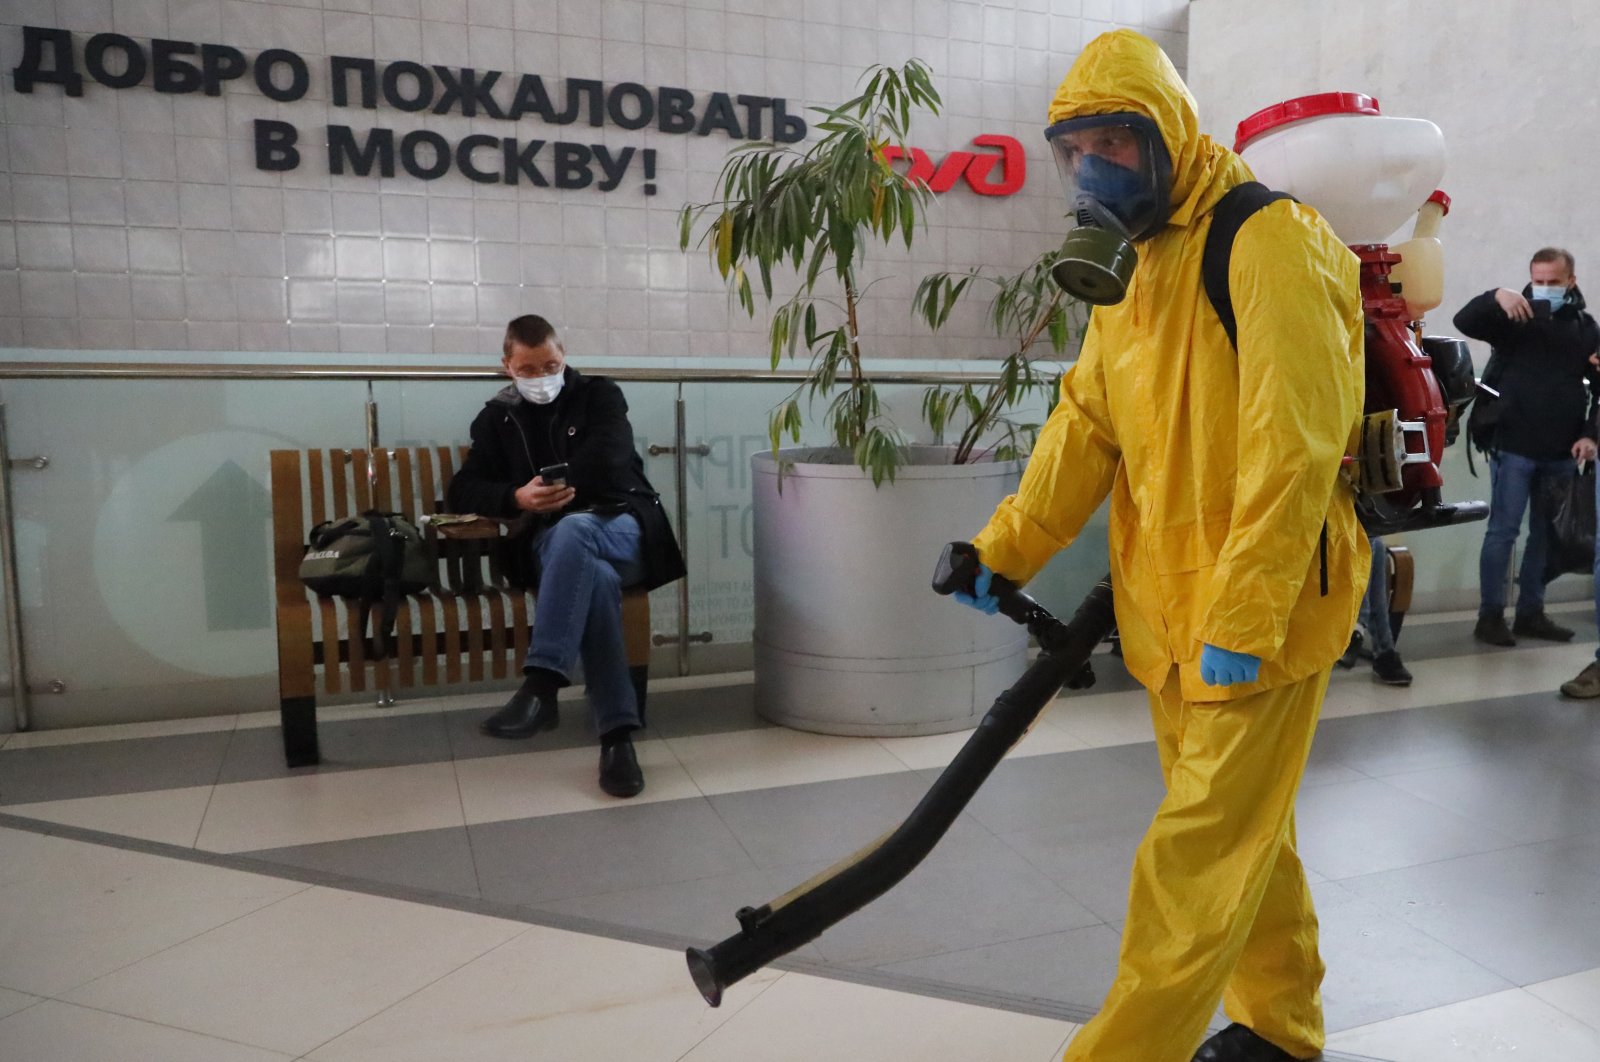 An employee of the Federal State Center for Special Risk Rescue Operations of Russia Emergency Situations disinfects Leningradsky railway station with the sign reading "Welcome to Moscow" on the wall in Moscow, Russia, Oct. 19, 2021. (AP Photo)